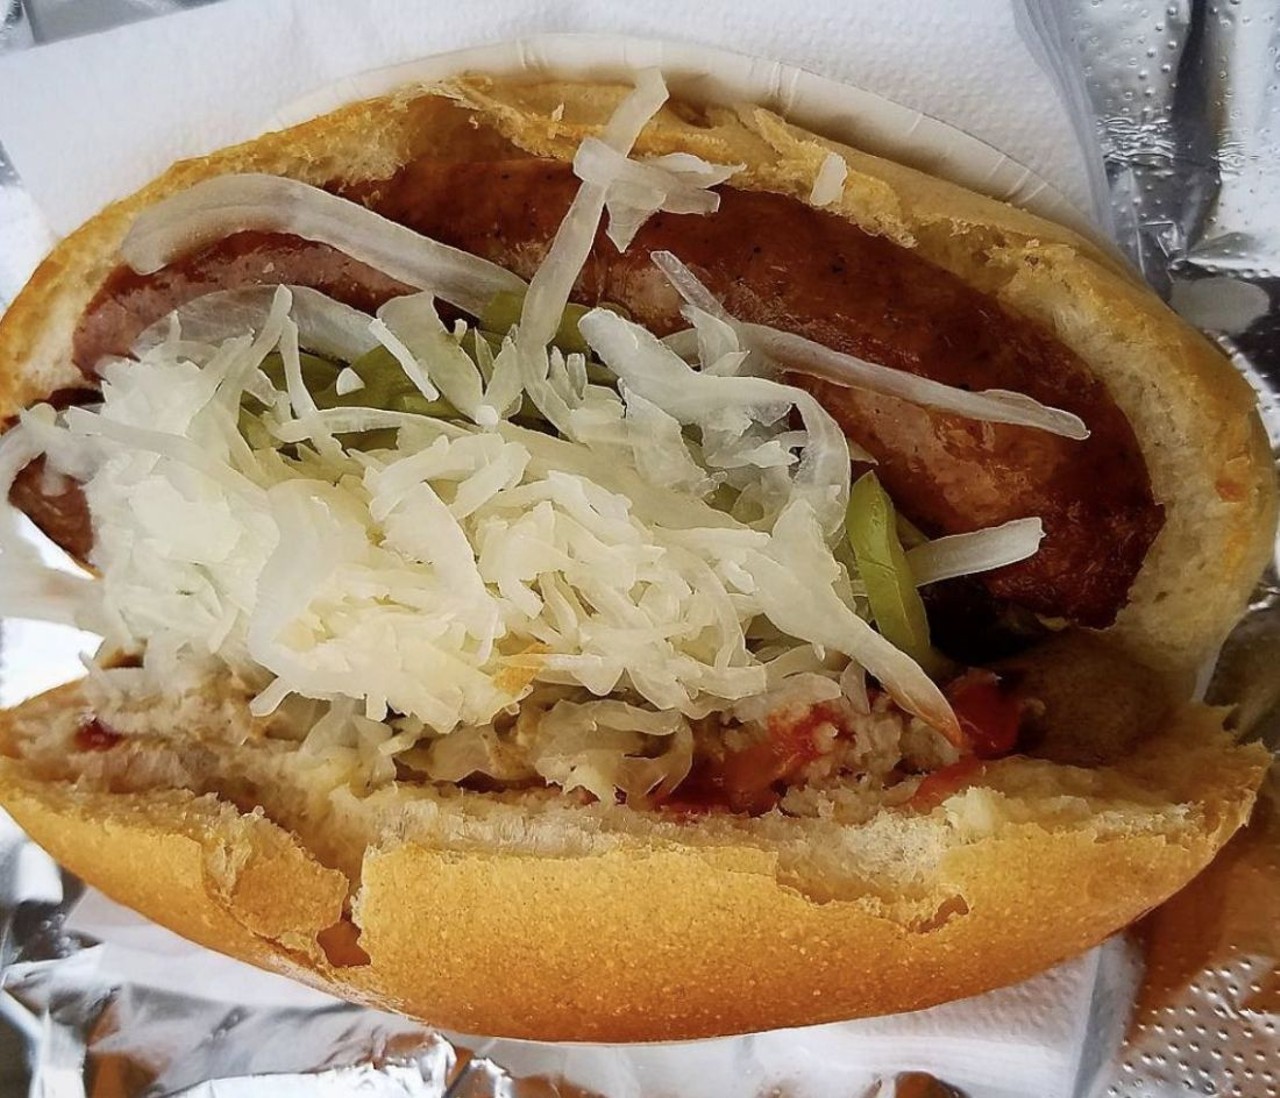 Bratwurst Sandwich 
What: A 'sandwich' made with the perfectly spiced German-style sausage
Why:  Frank's Bratwurst has been "serving the wurst since 1970," whether piled high with kraut and horseradish, or served plain with brown mustard
Photo via Scene Archives